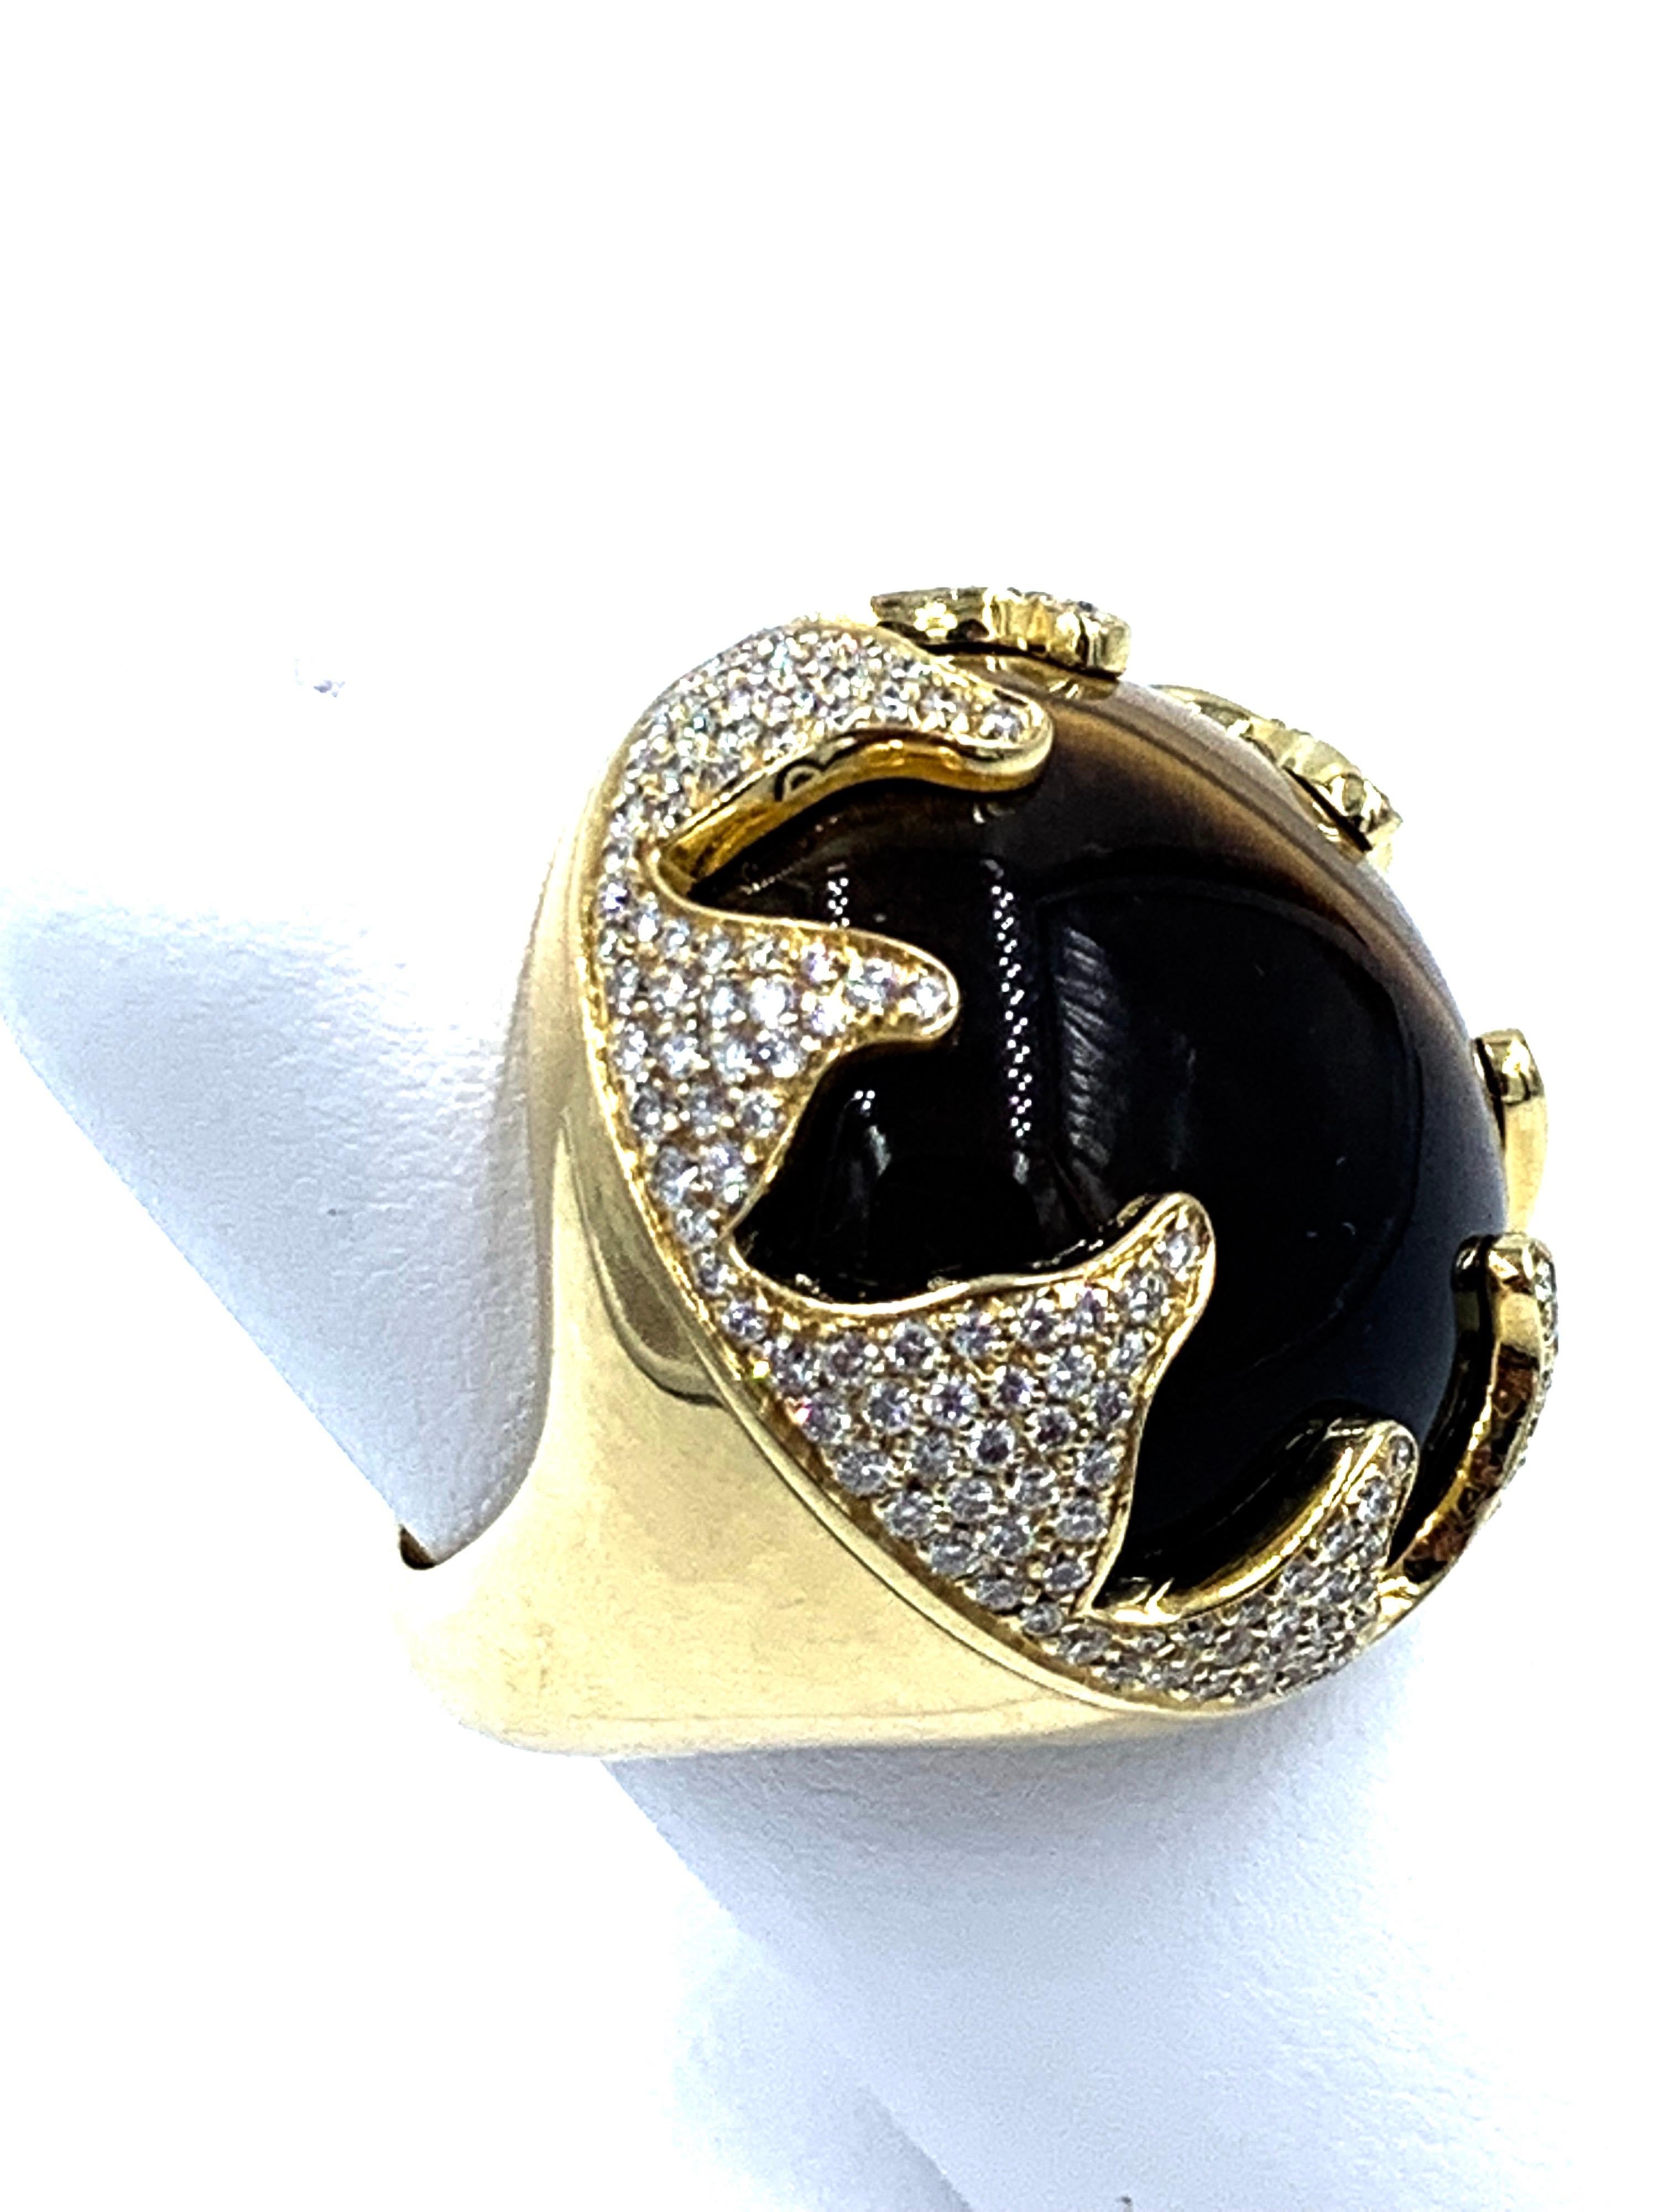 Women's or Men's Pasquale Bruni Tiger Eye Ring For Sale